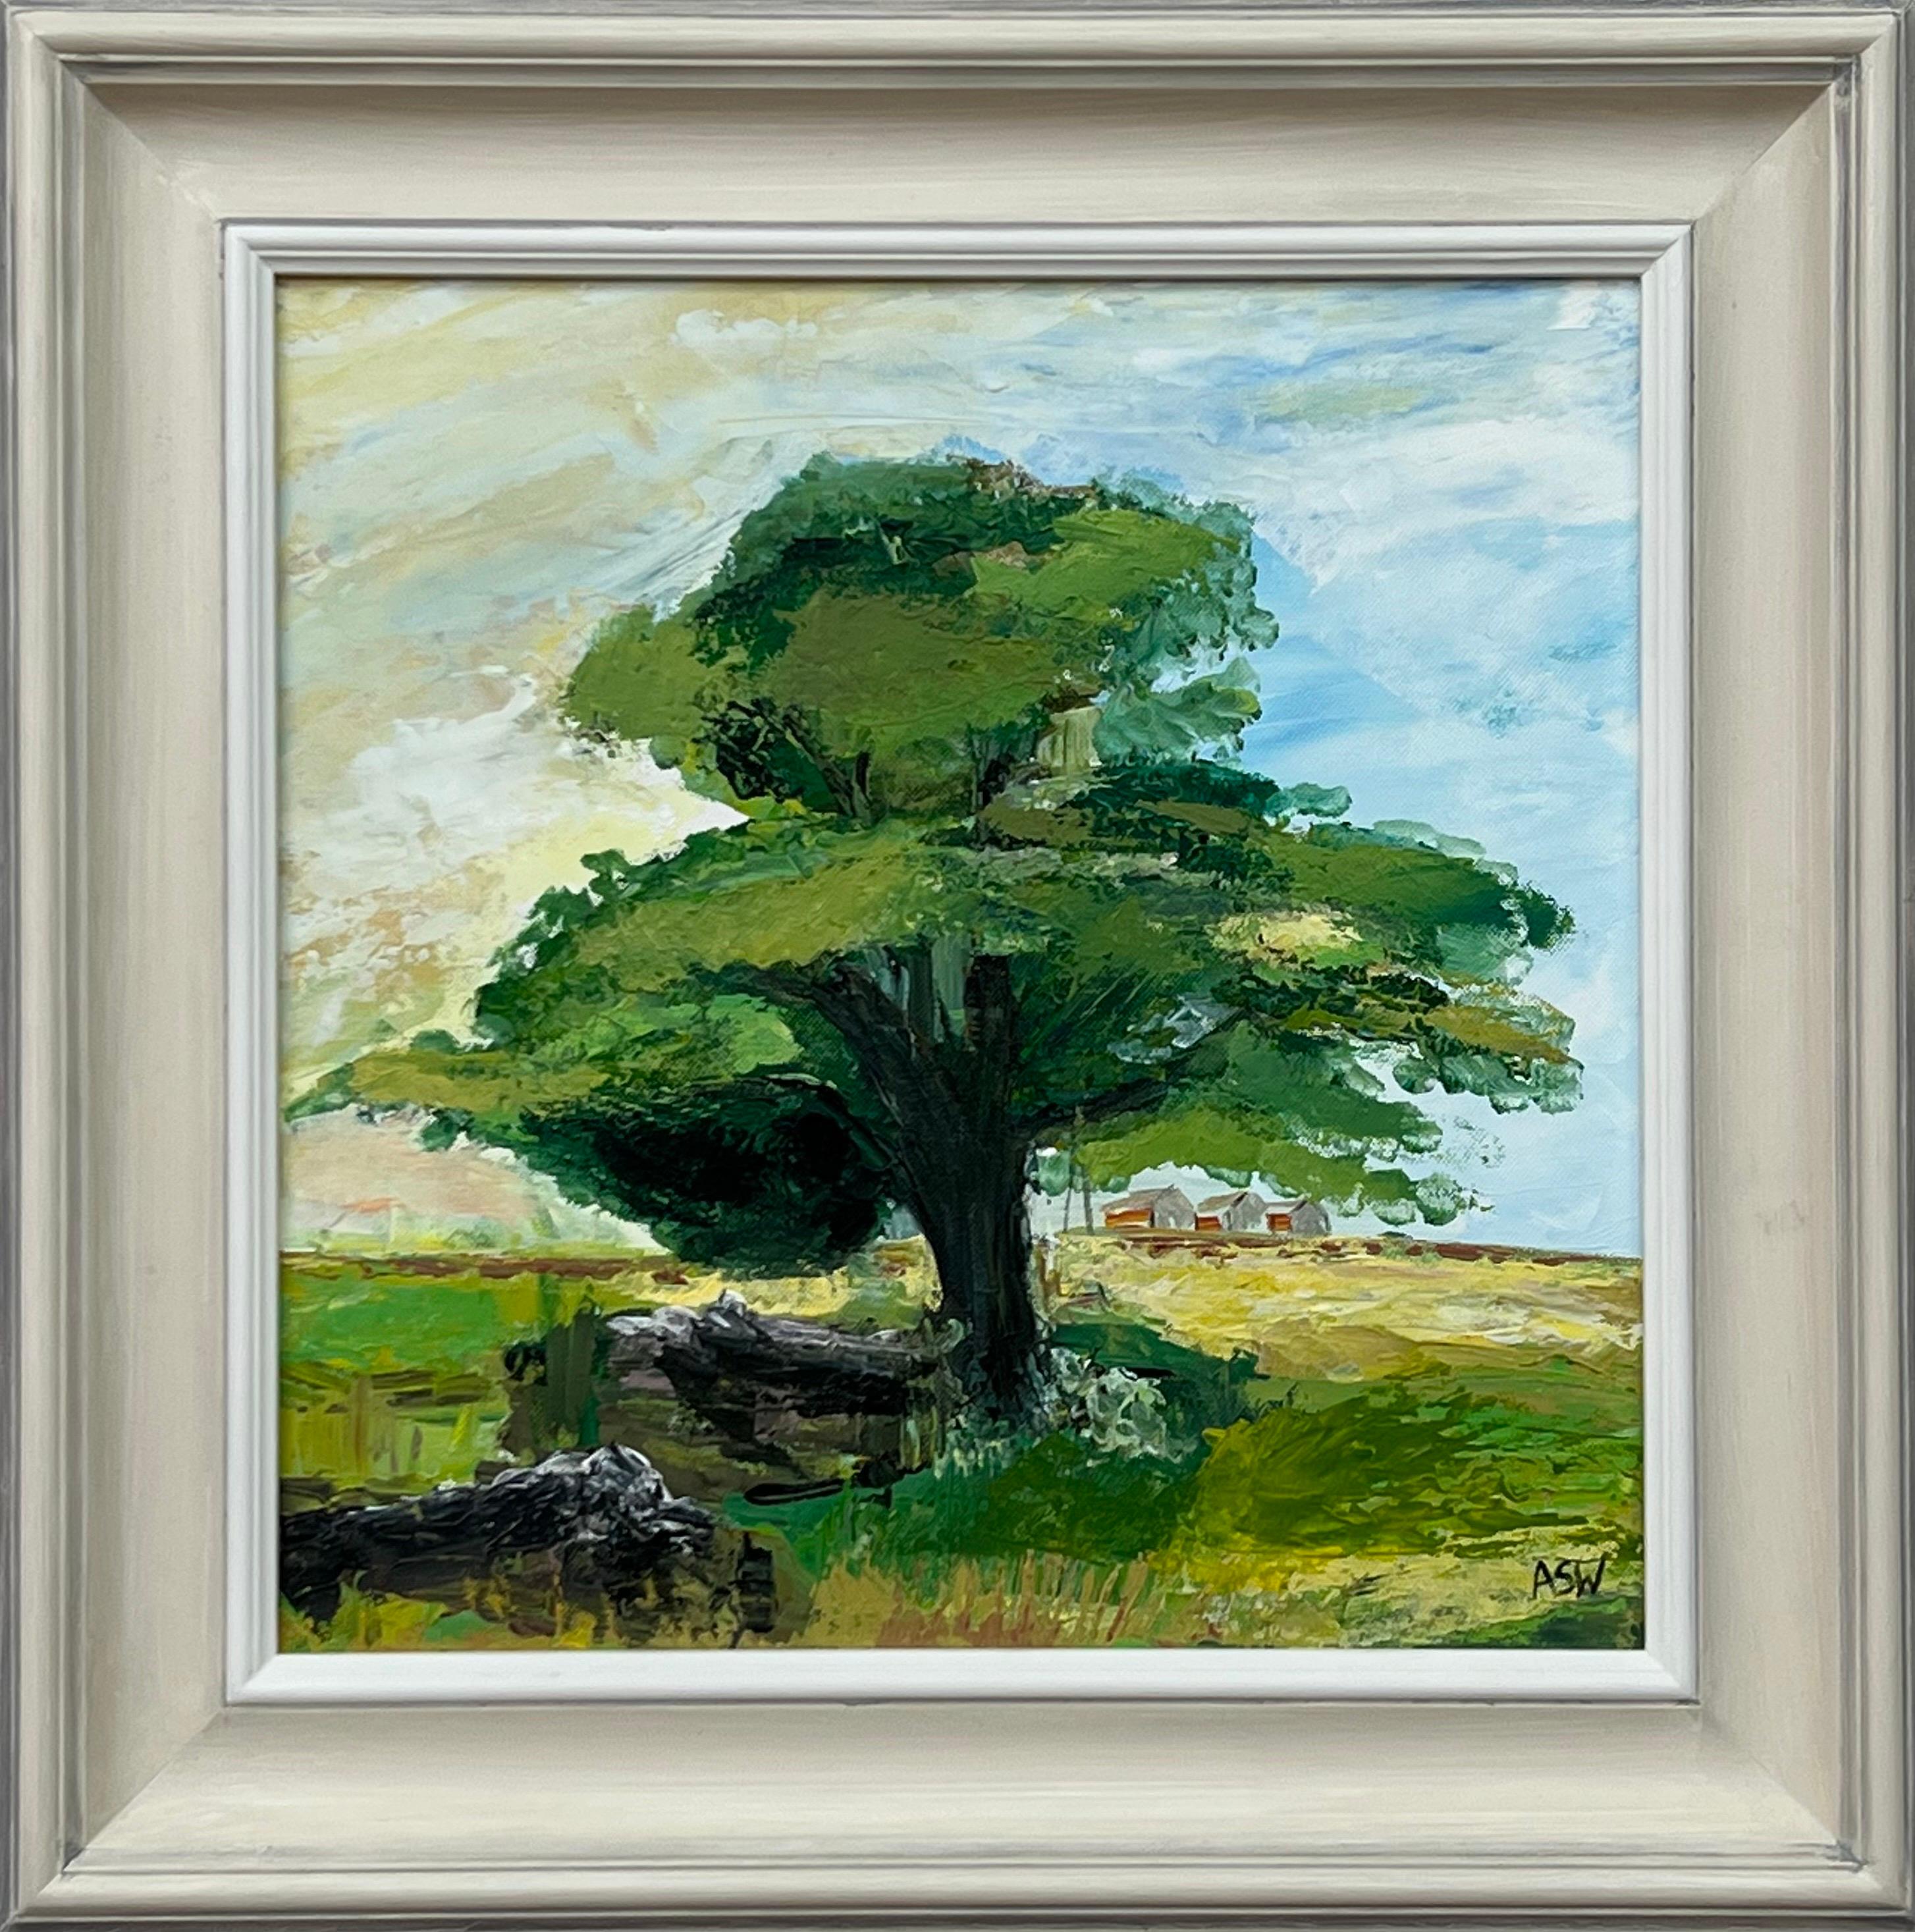 Expressive Impasto Landscape Painting of Oak Tree by Contemporary British Artist